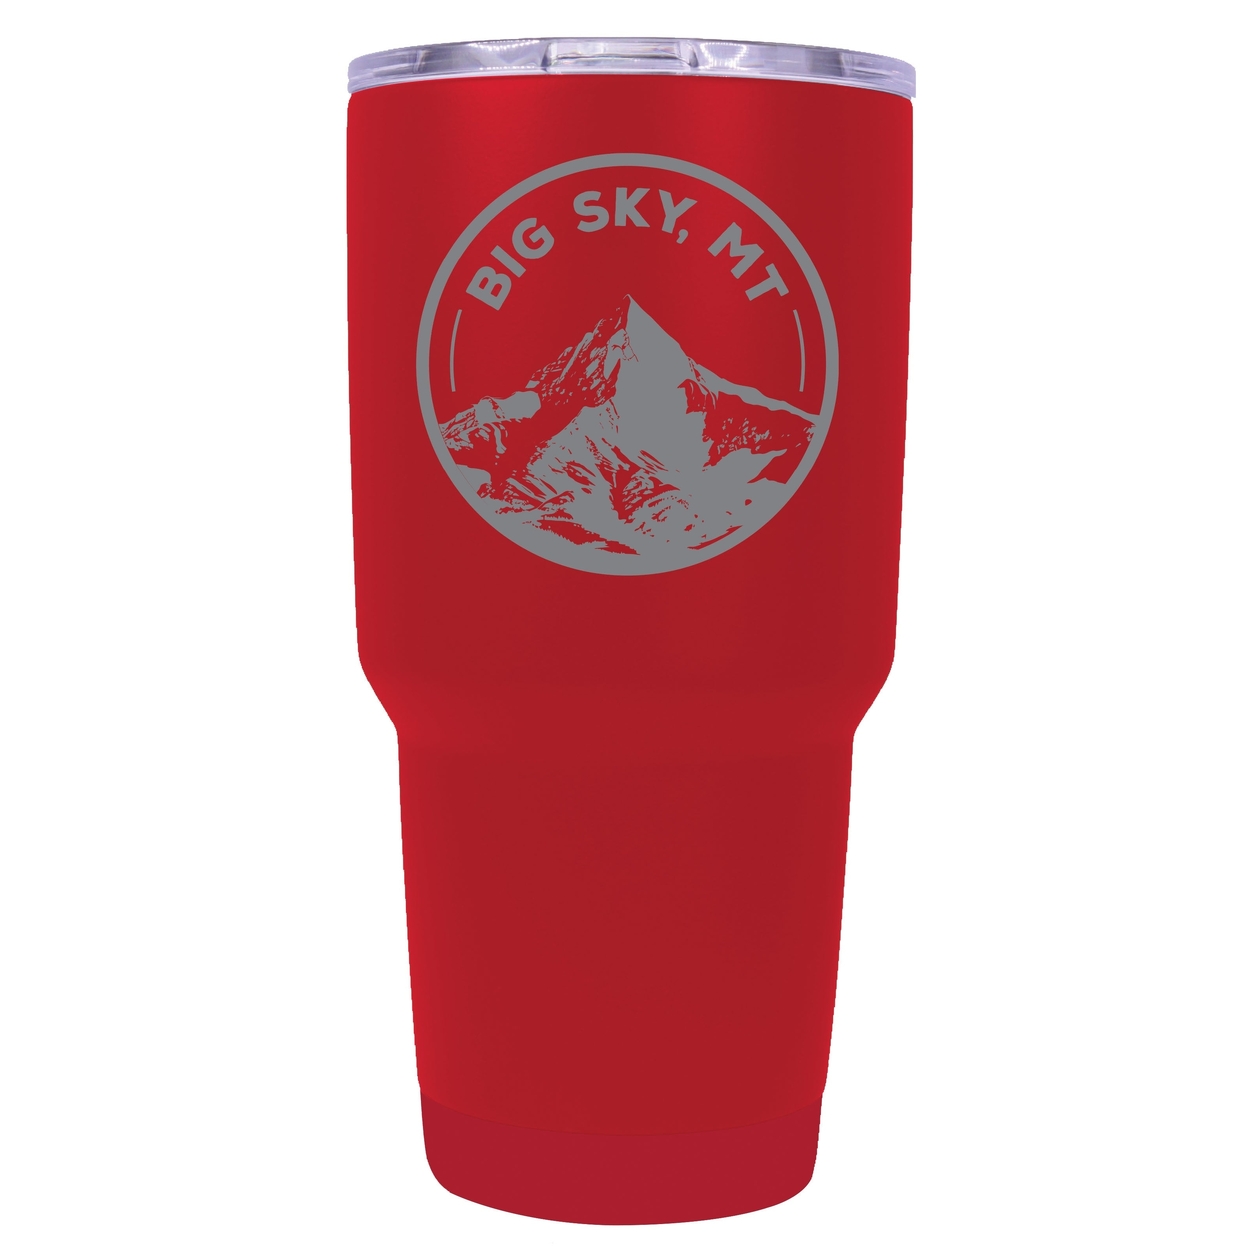 Big Sky Montana Souvenir 24 Oz Engraved Insulated Stainless Steel Tumbler - Red,,2-Pack